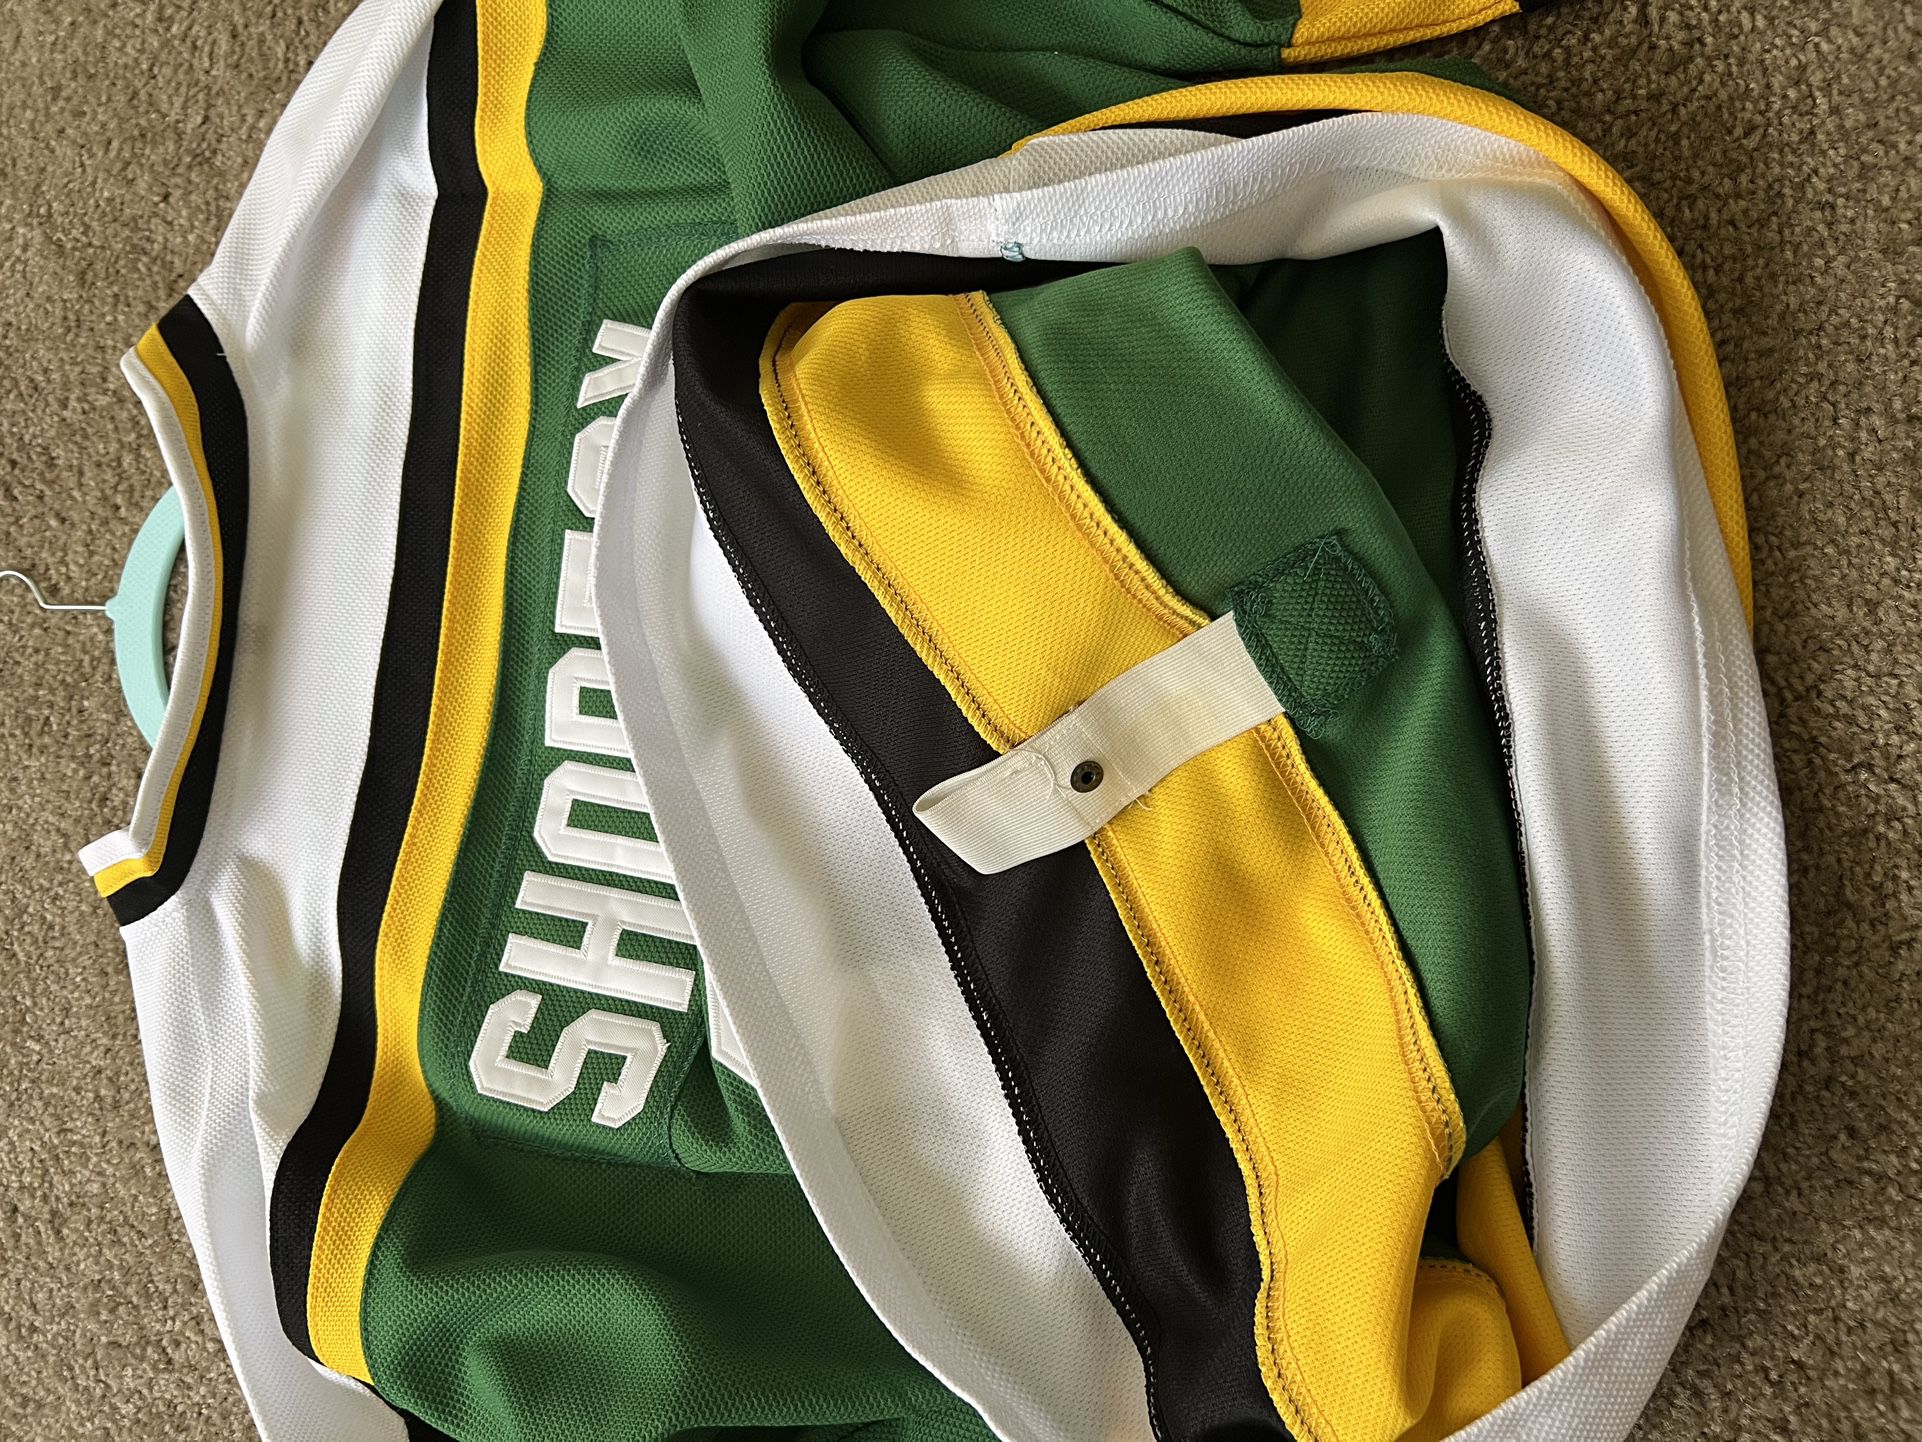 Shorsey Letterkenny Jersey for Sale in Lakewood, CO - OfferUp